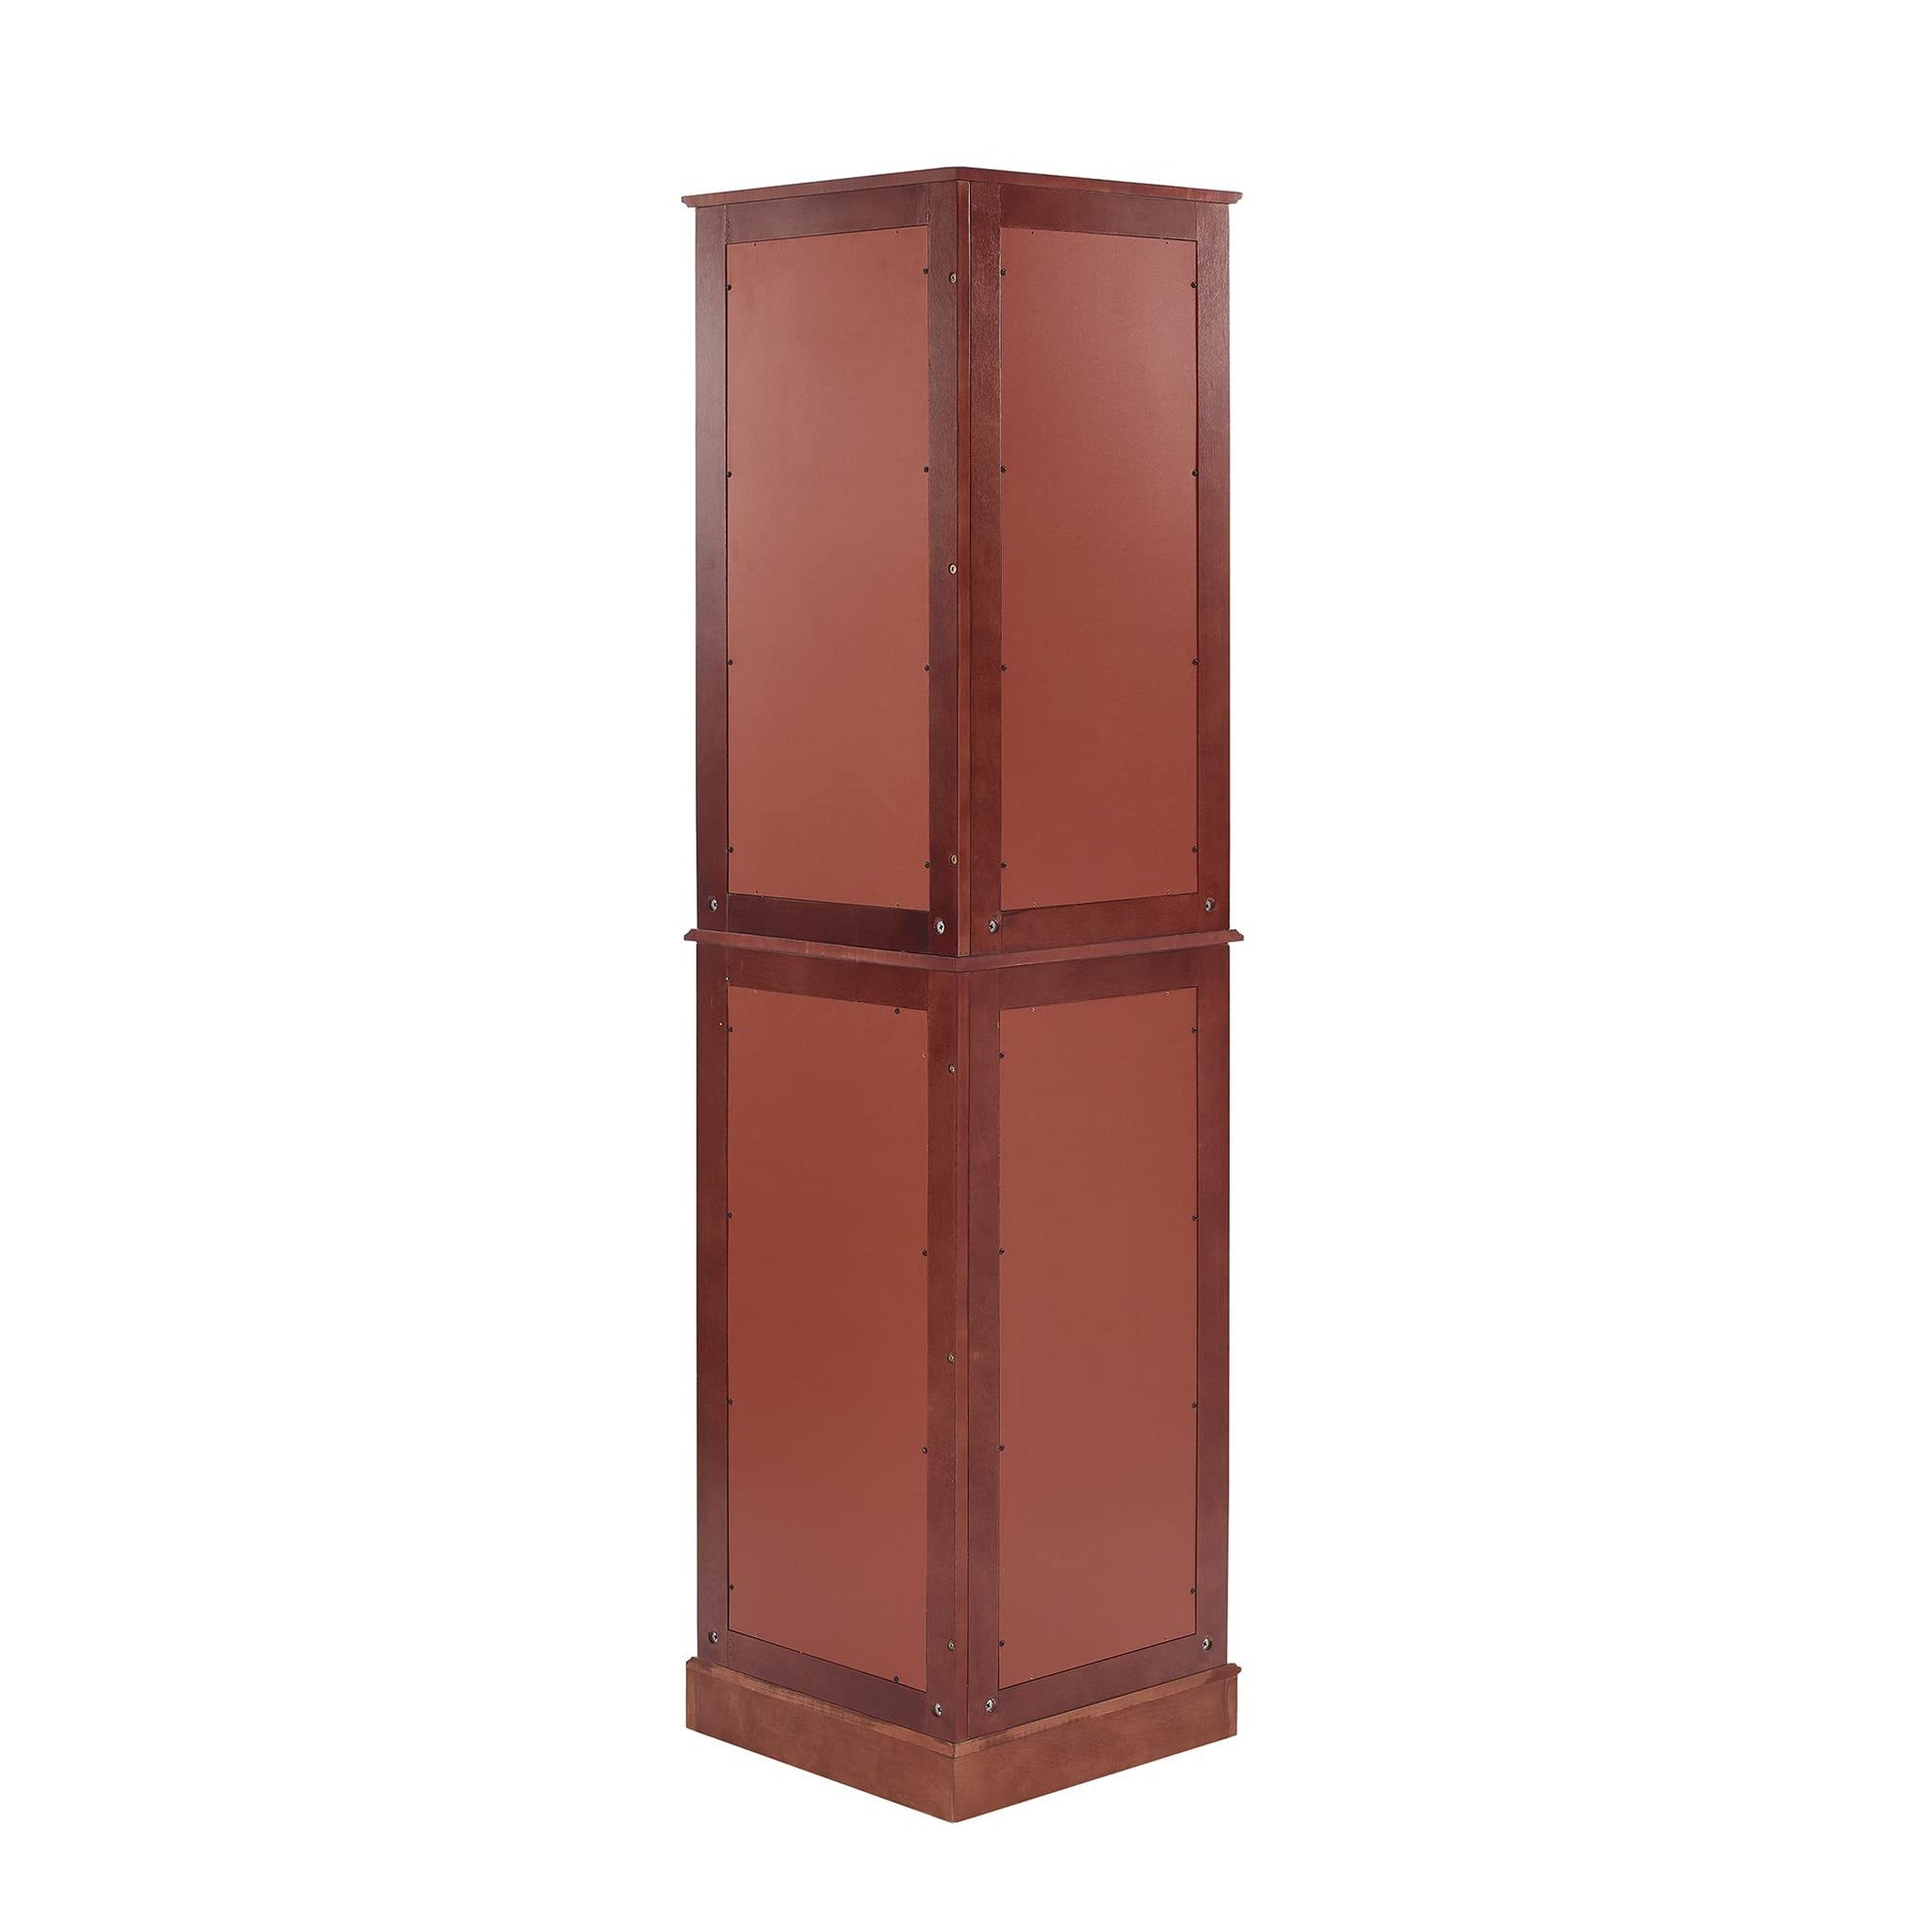 Corner Curio Dispaly Cabinet With Lights,